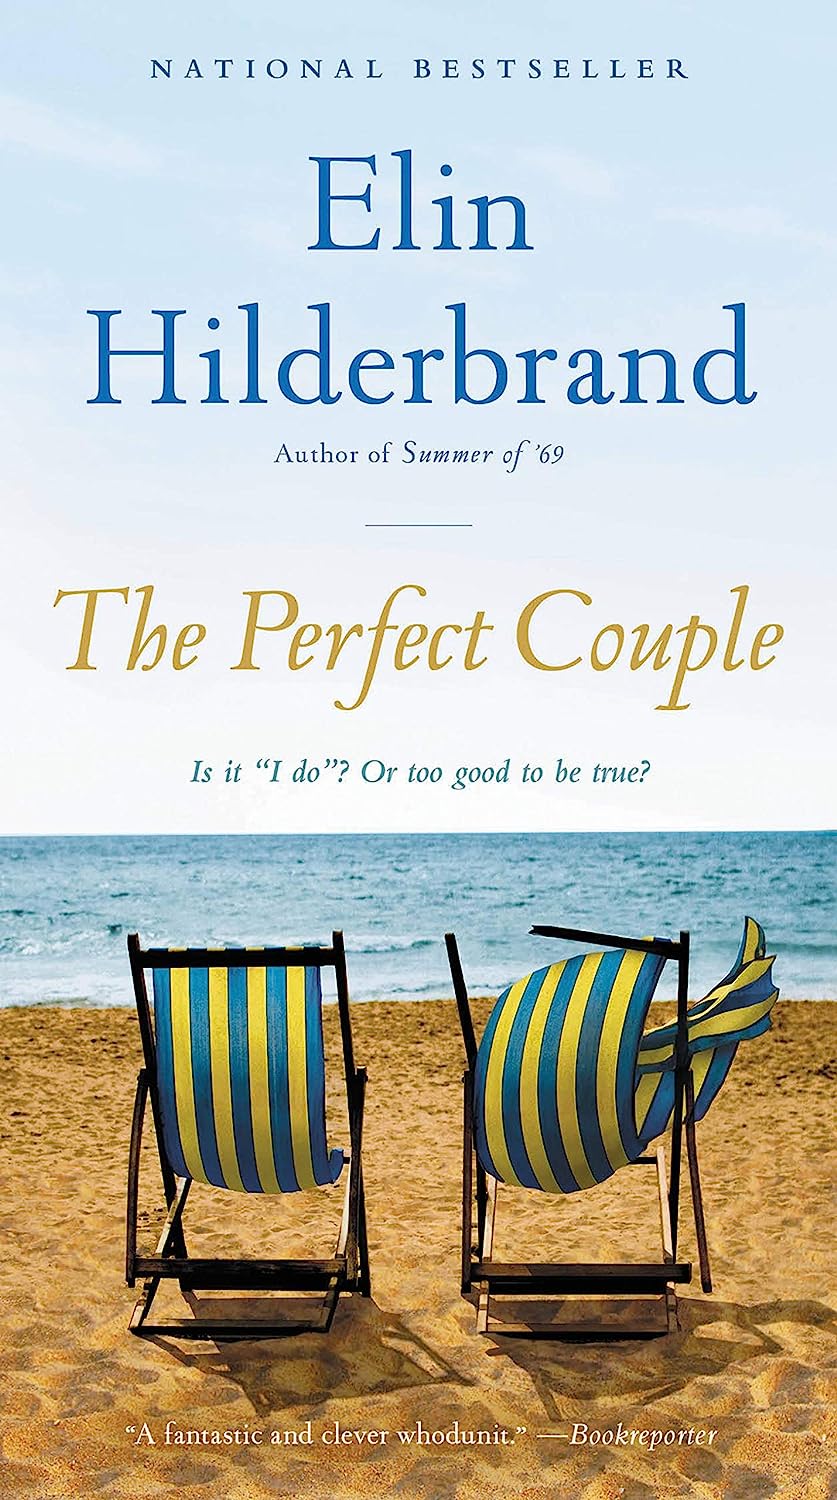 Book cover of The Perfect Couple by Elin Hilderbrand showing two beach chairs facing the sea